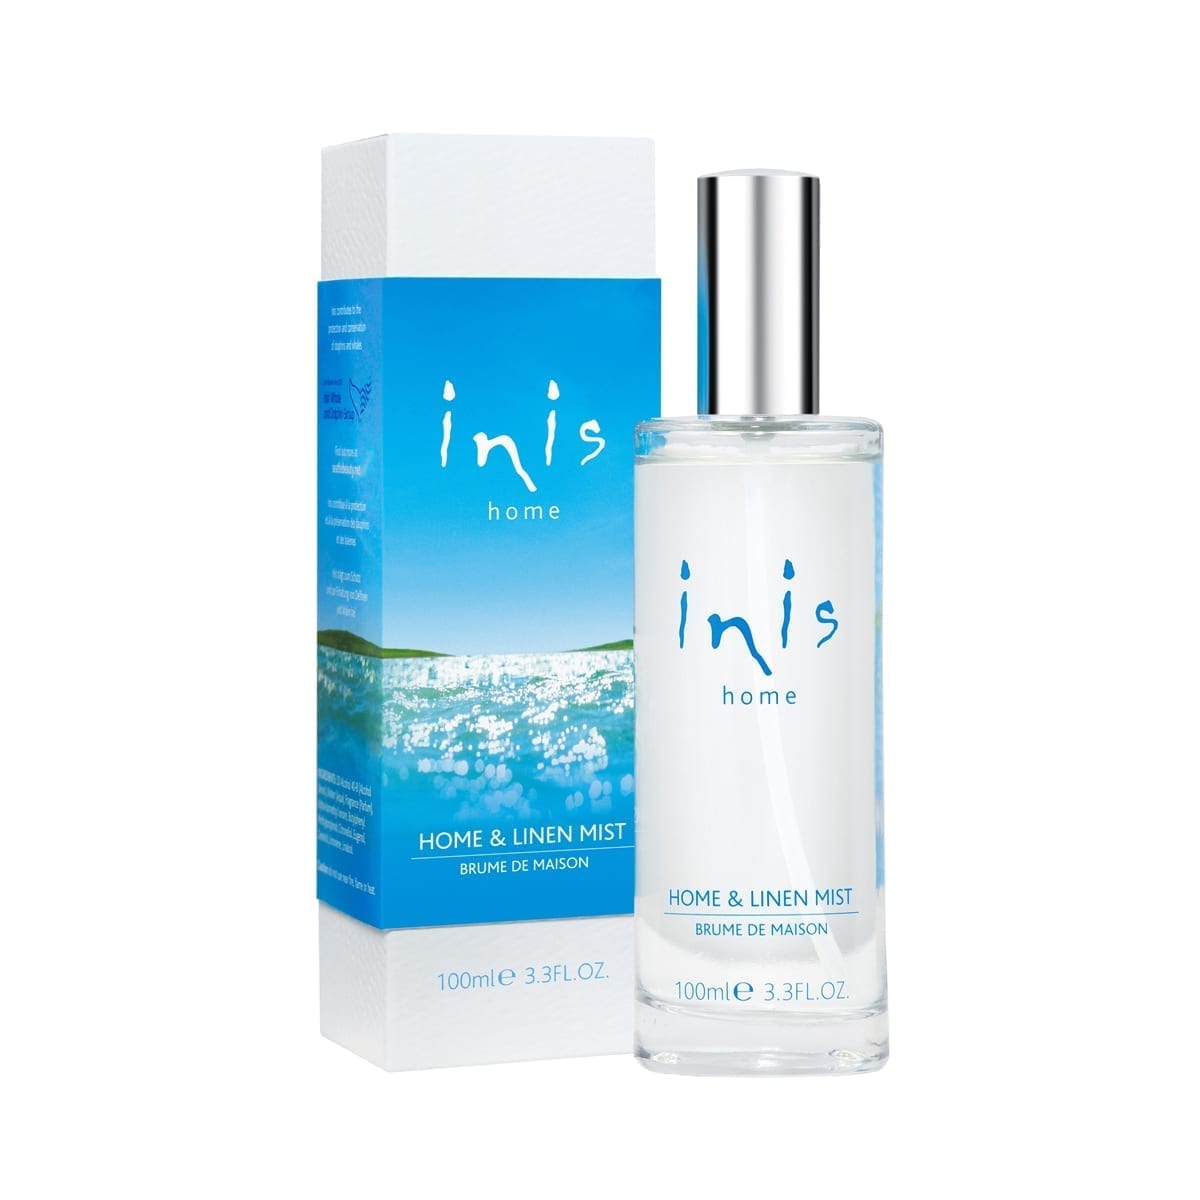 Inis: Home and Linen Mist 100mL